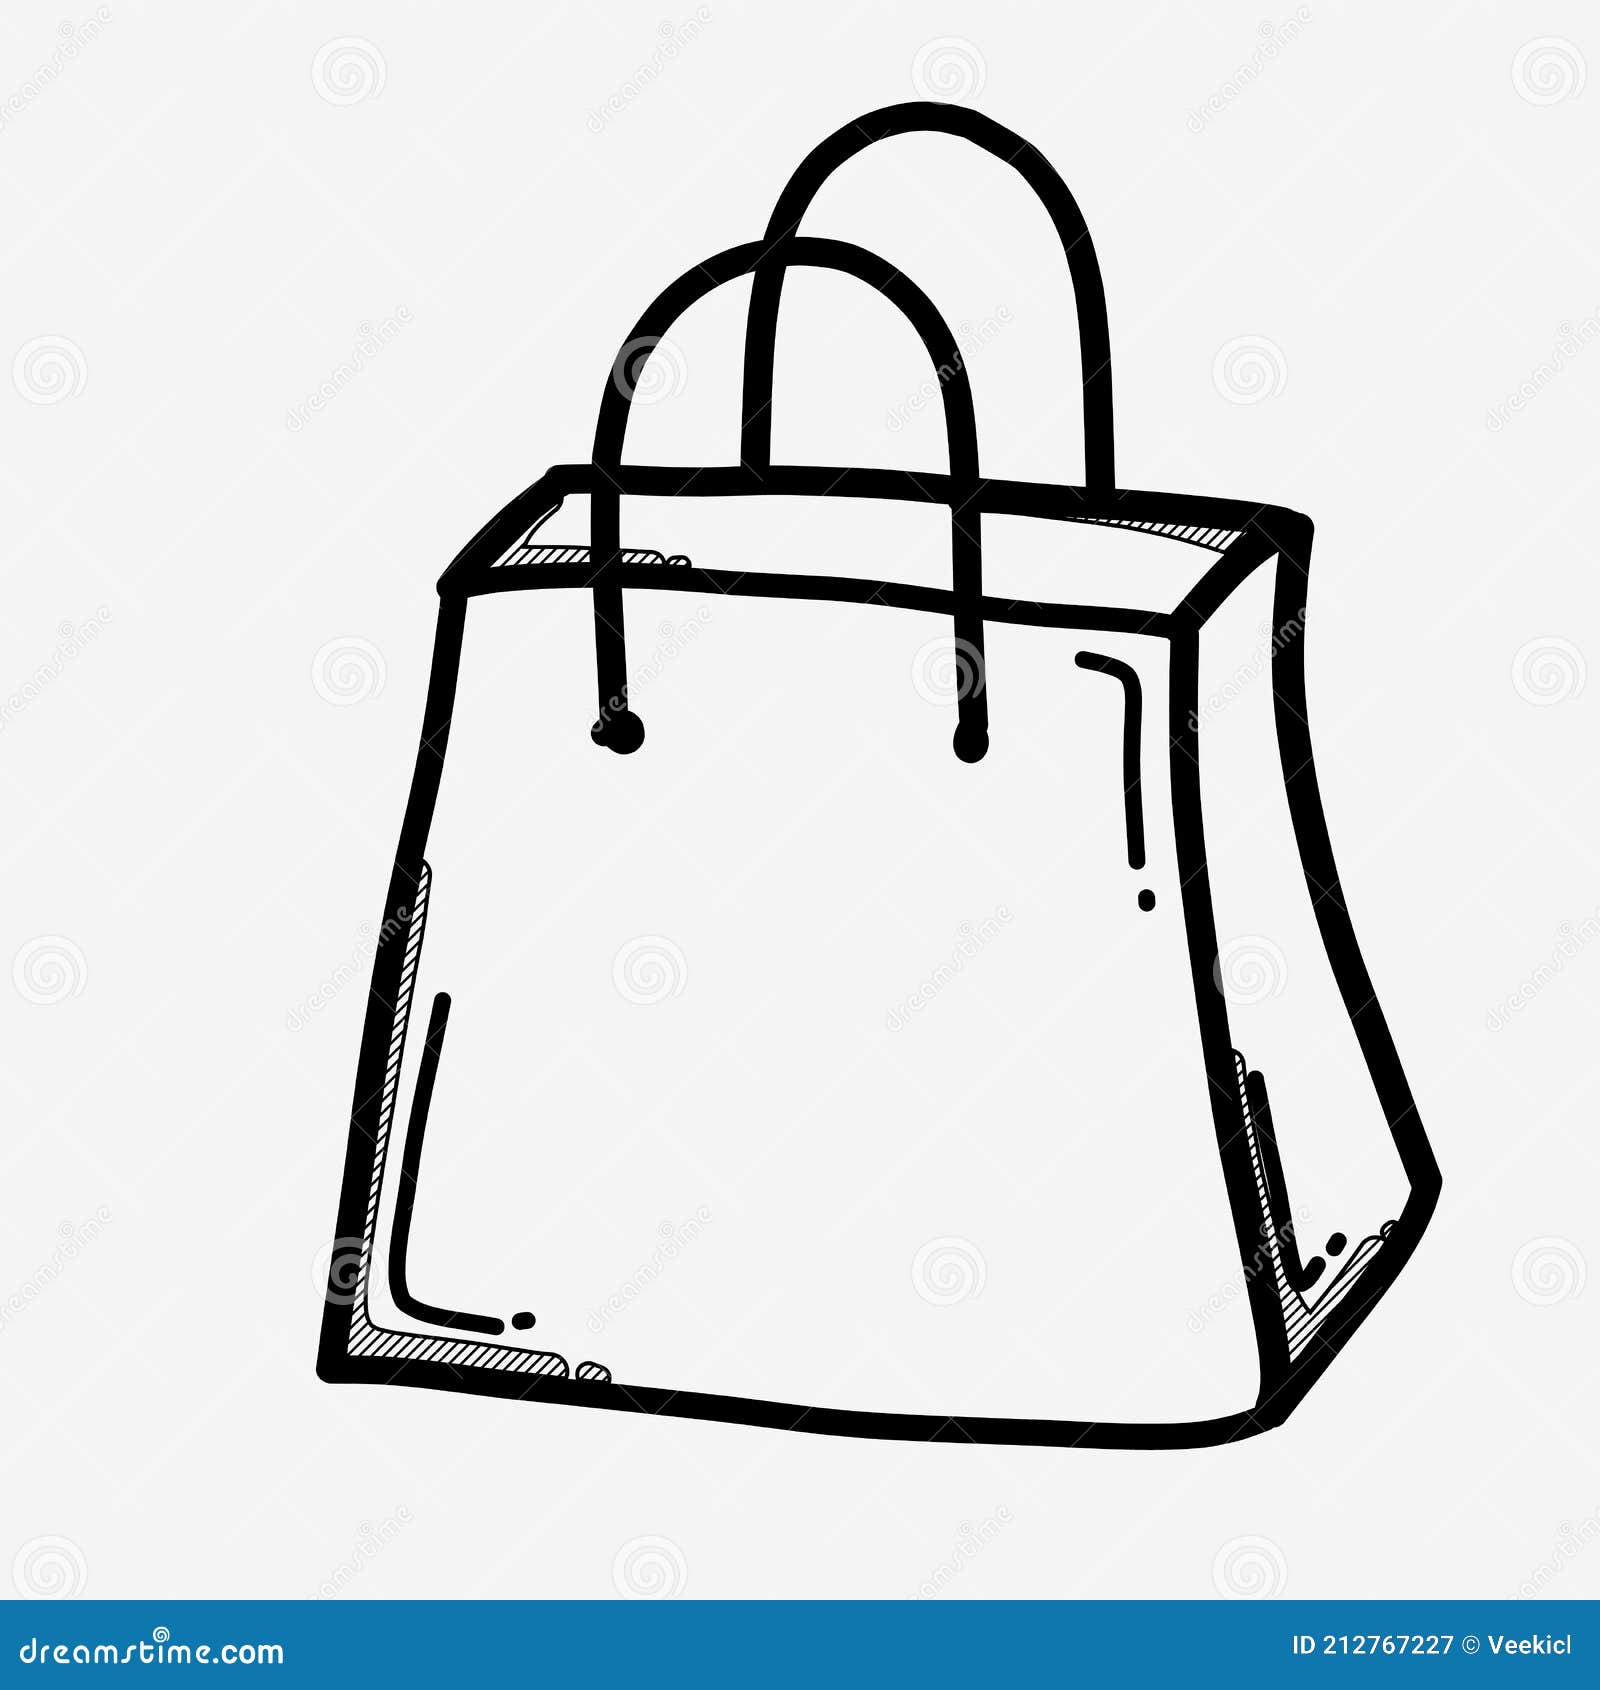 100,000 Shopping bag icon Vector Images